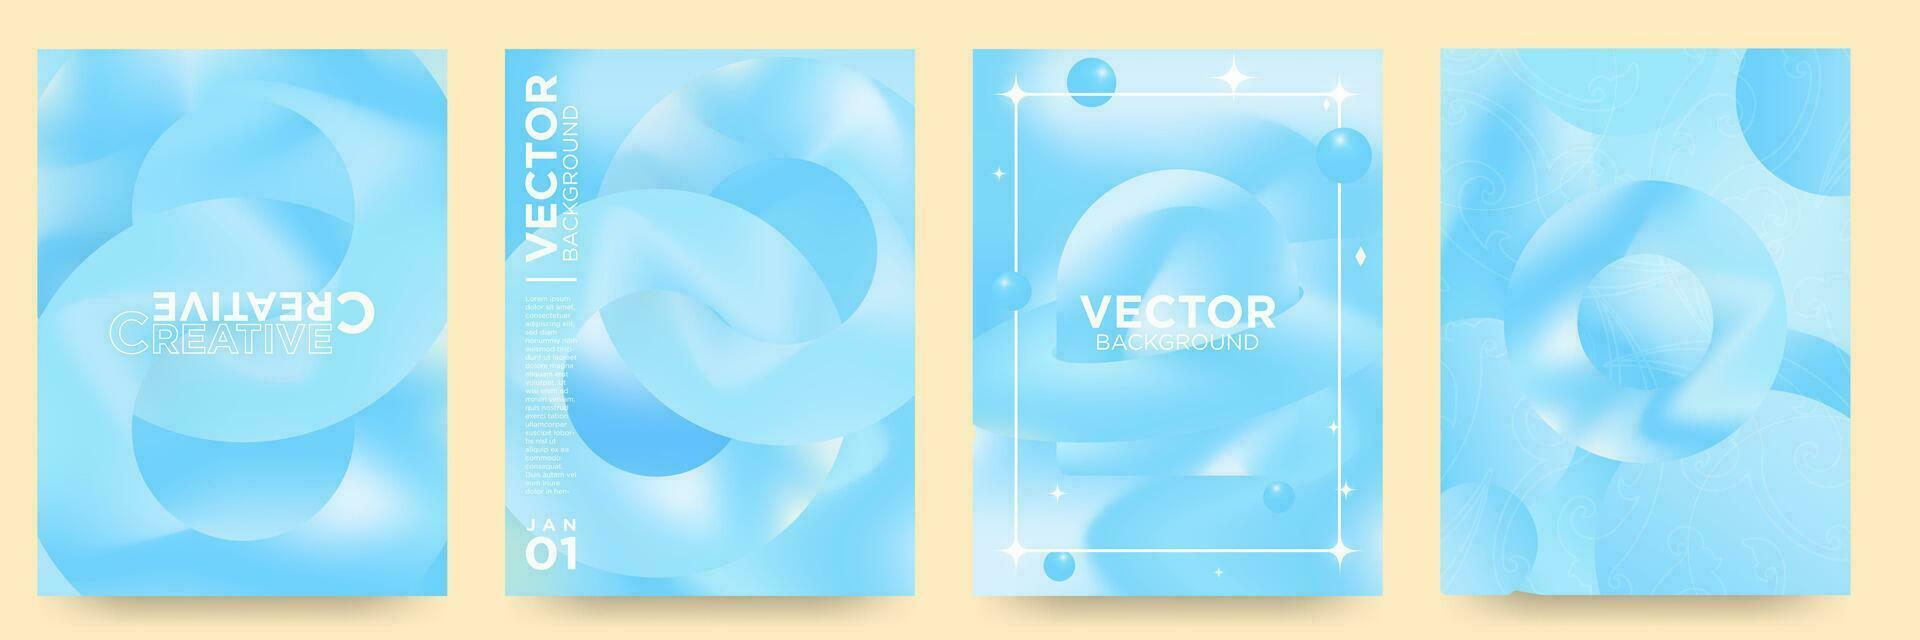 Fluid 3d gradient background vector. Digital and trendy style with 3d geometric shapes. Blue pastel template for designs, covers, posters, social media, posters, artworks, idol, banners, background. vector